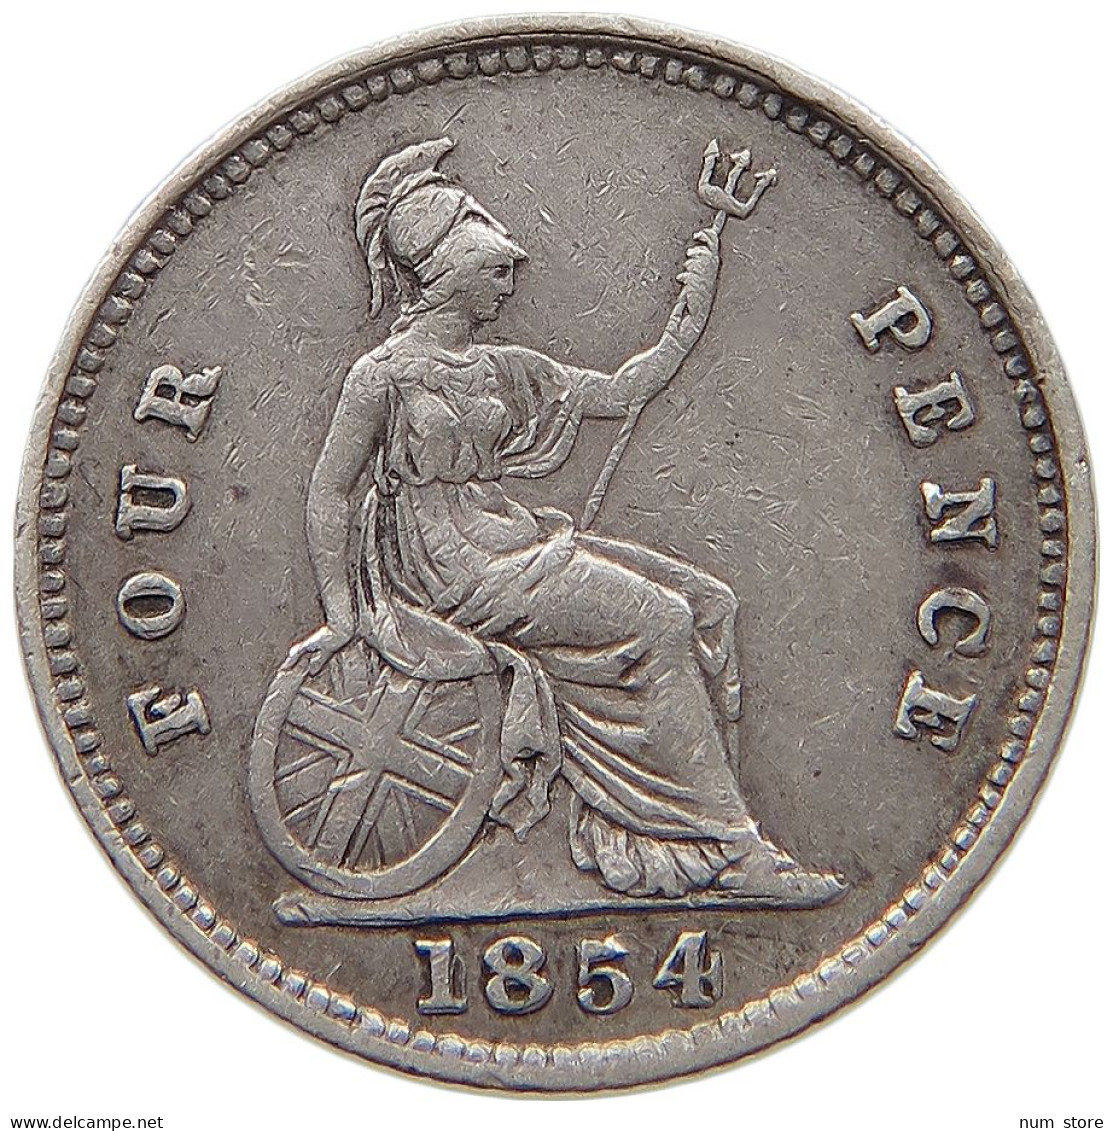 GREAT BRITAIN FOURPENCE 1854 Victoria 1837-1901 #t095 0631 - G. 4 Pence/ Groat